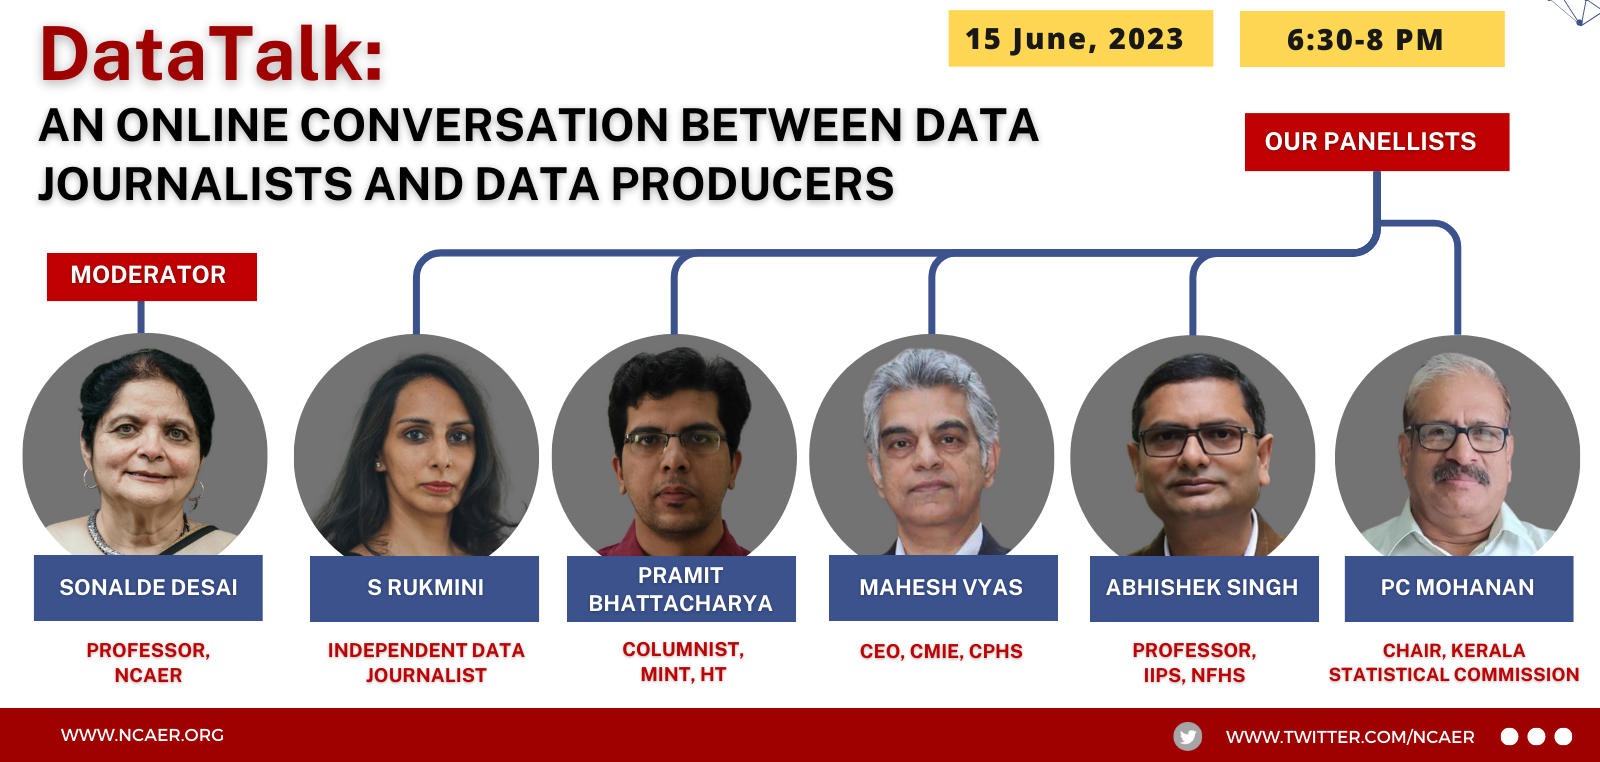 DataTalk: An Online Conversation between Data Journalists and Data Producers